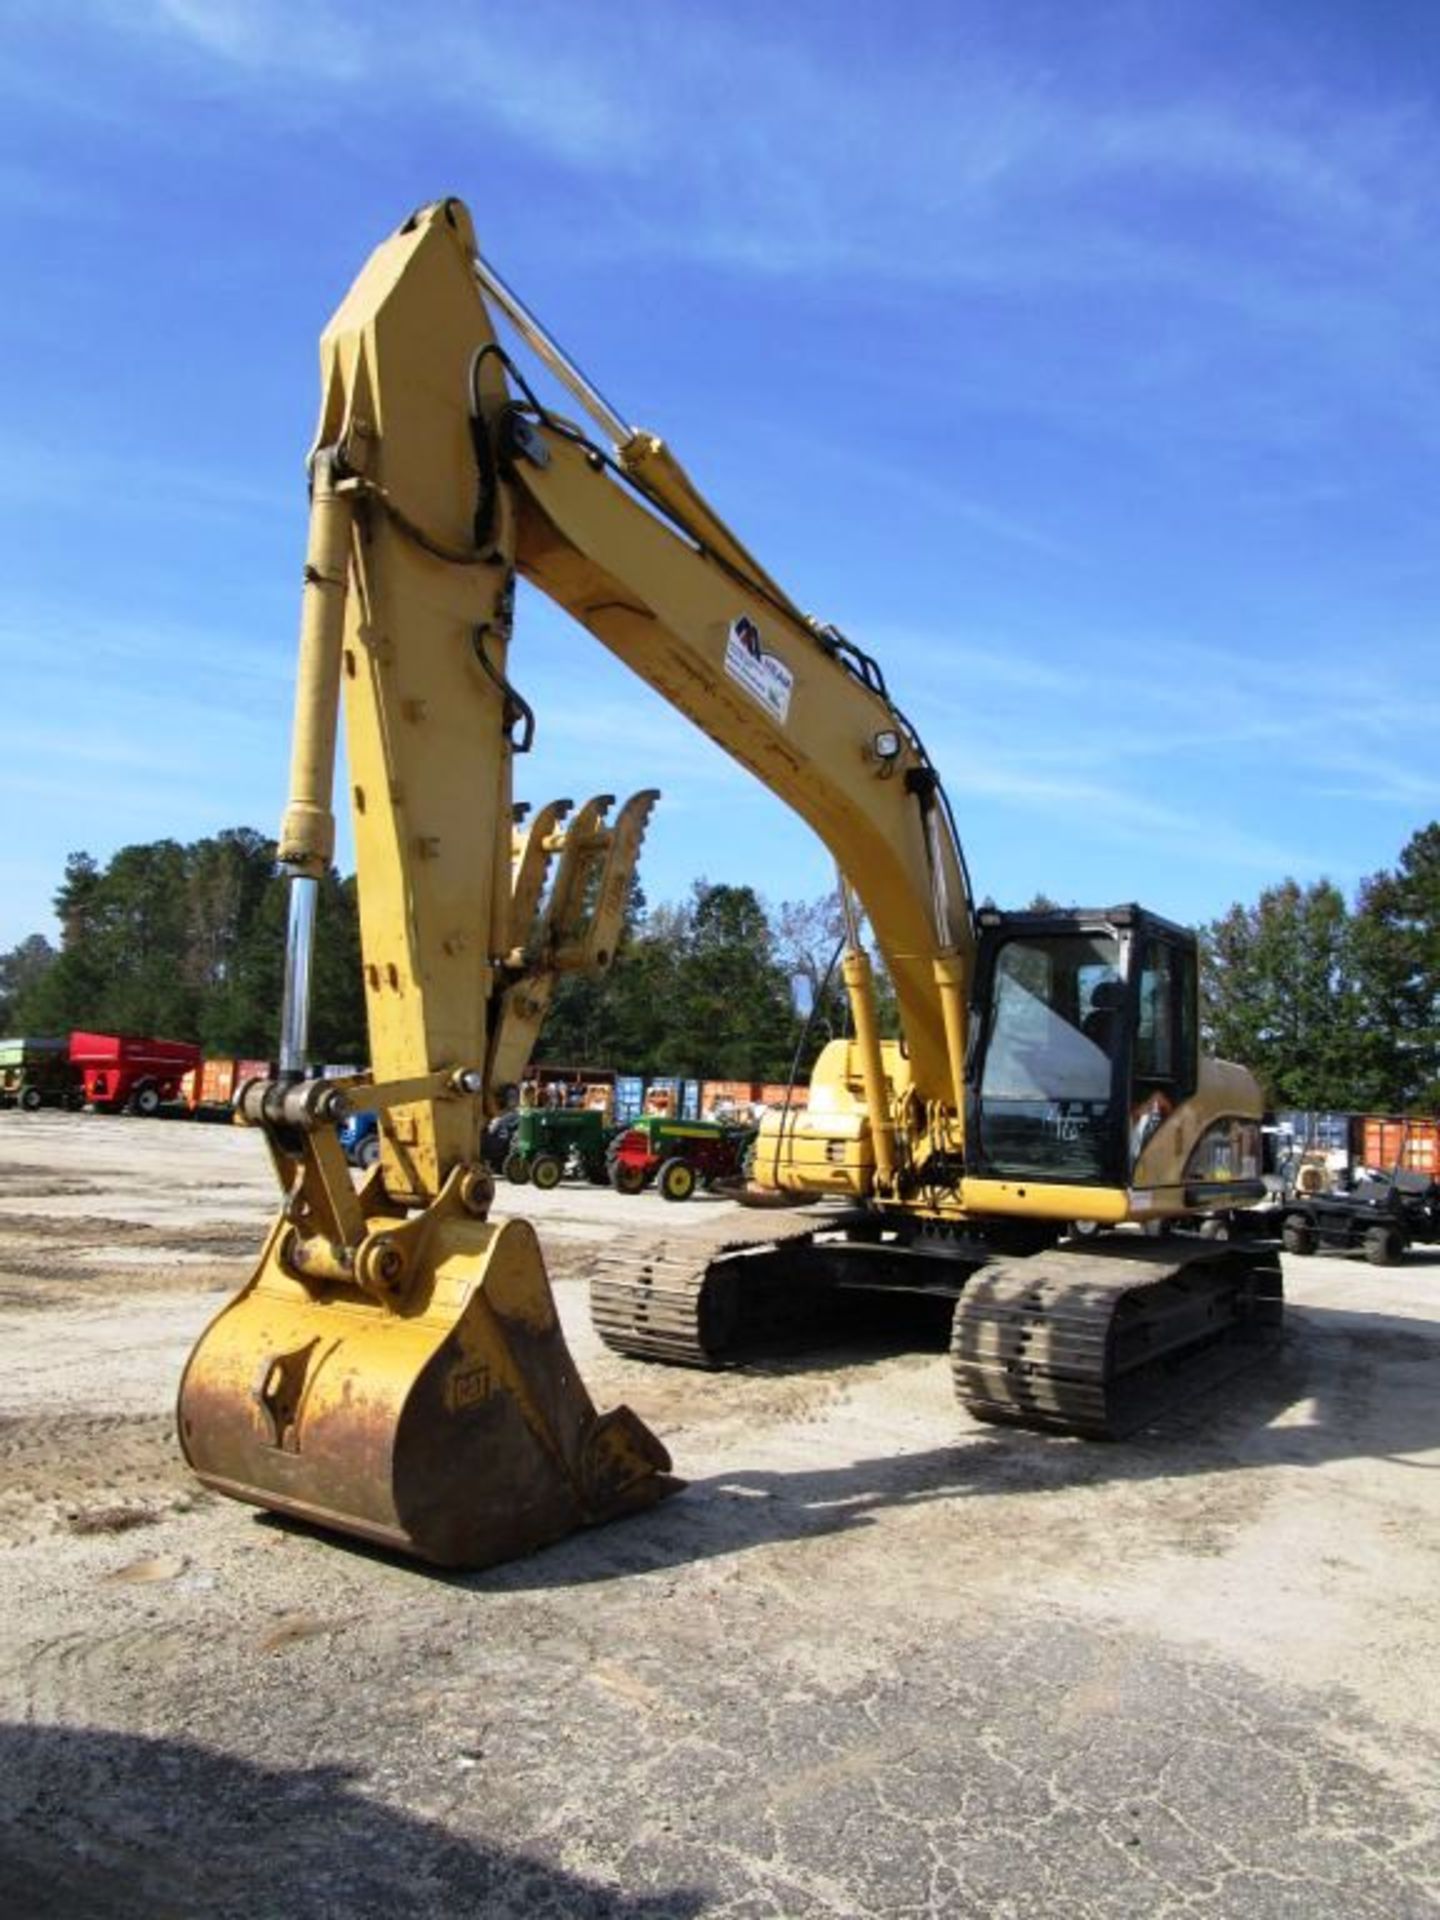 CATERPILLAR 320DL Excavator, sn: PHX00940, 31.5'' Pads, 49'' Digging Bucket, Hydraulic Thumb, HRS: - Image 2 of 14